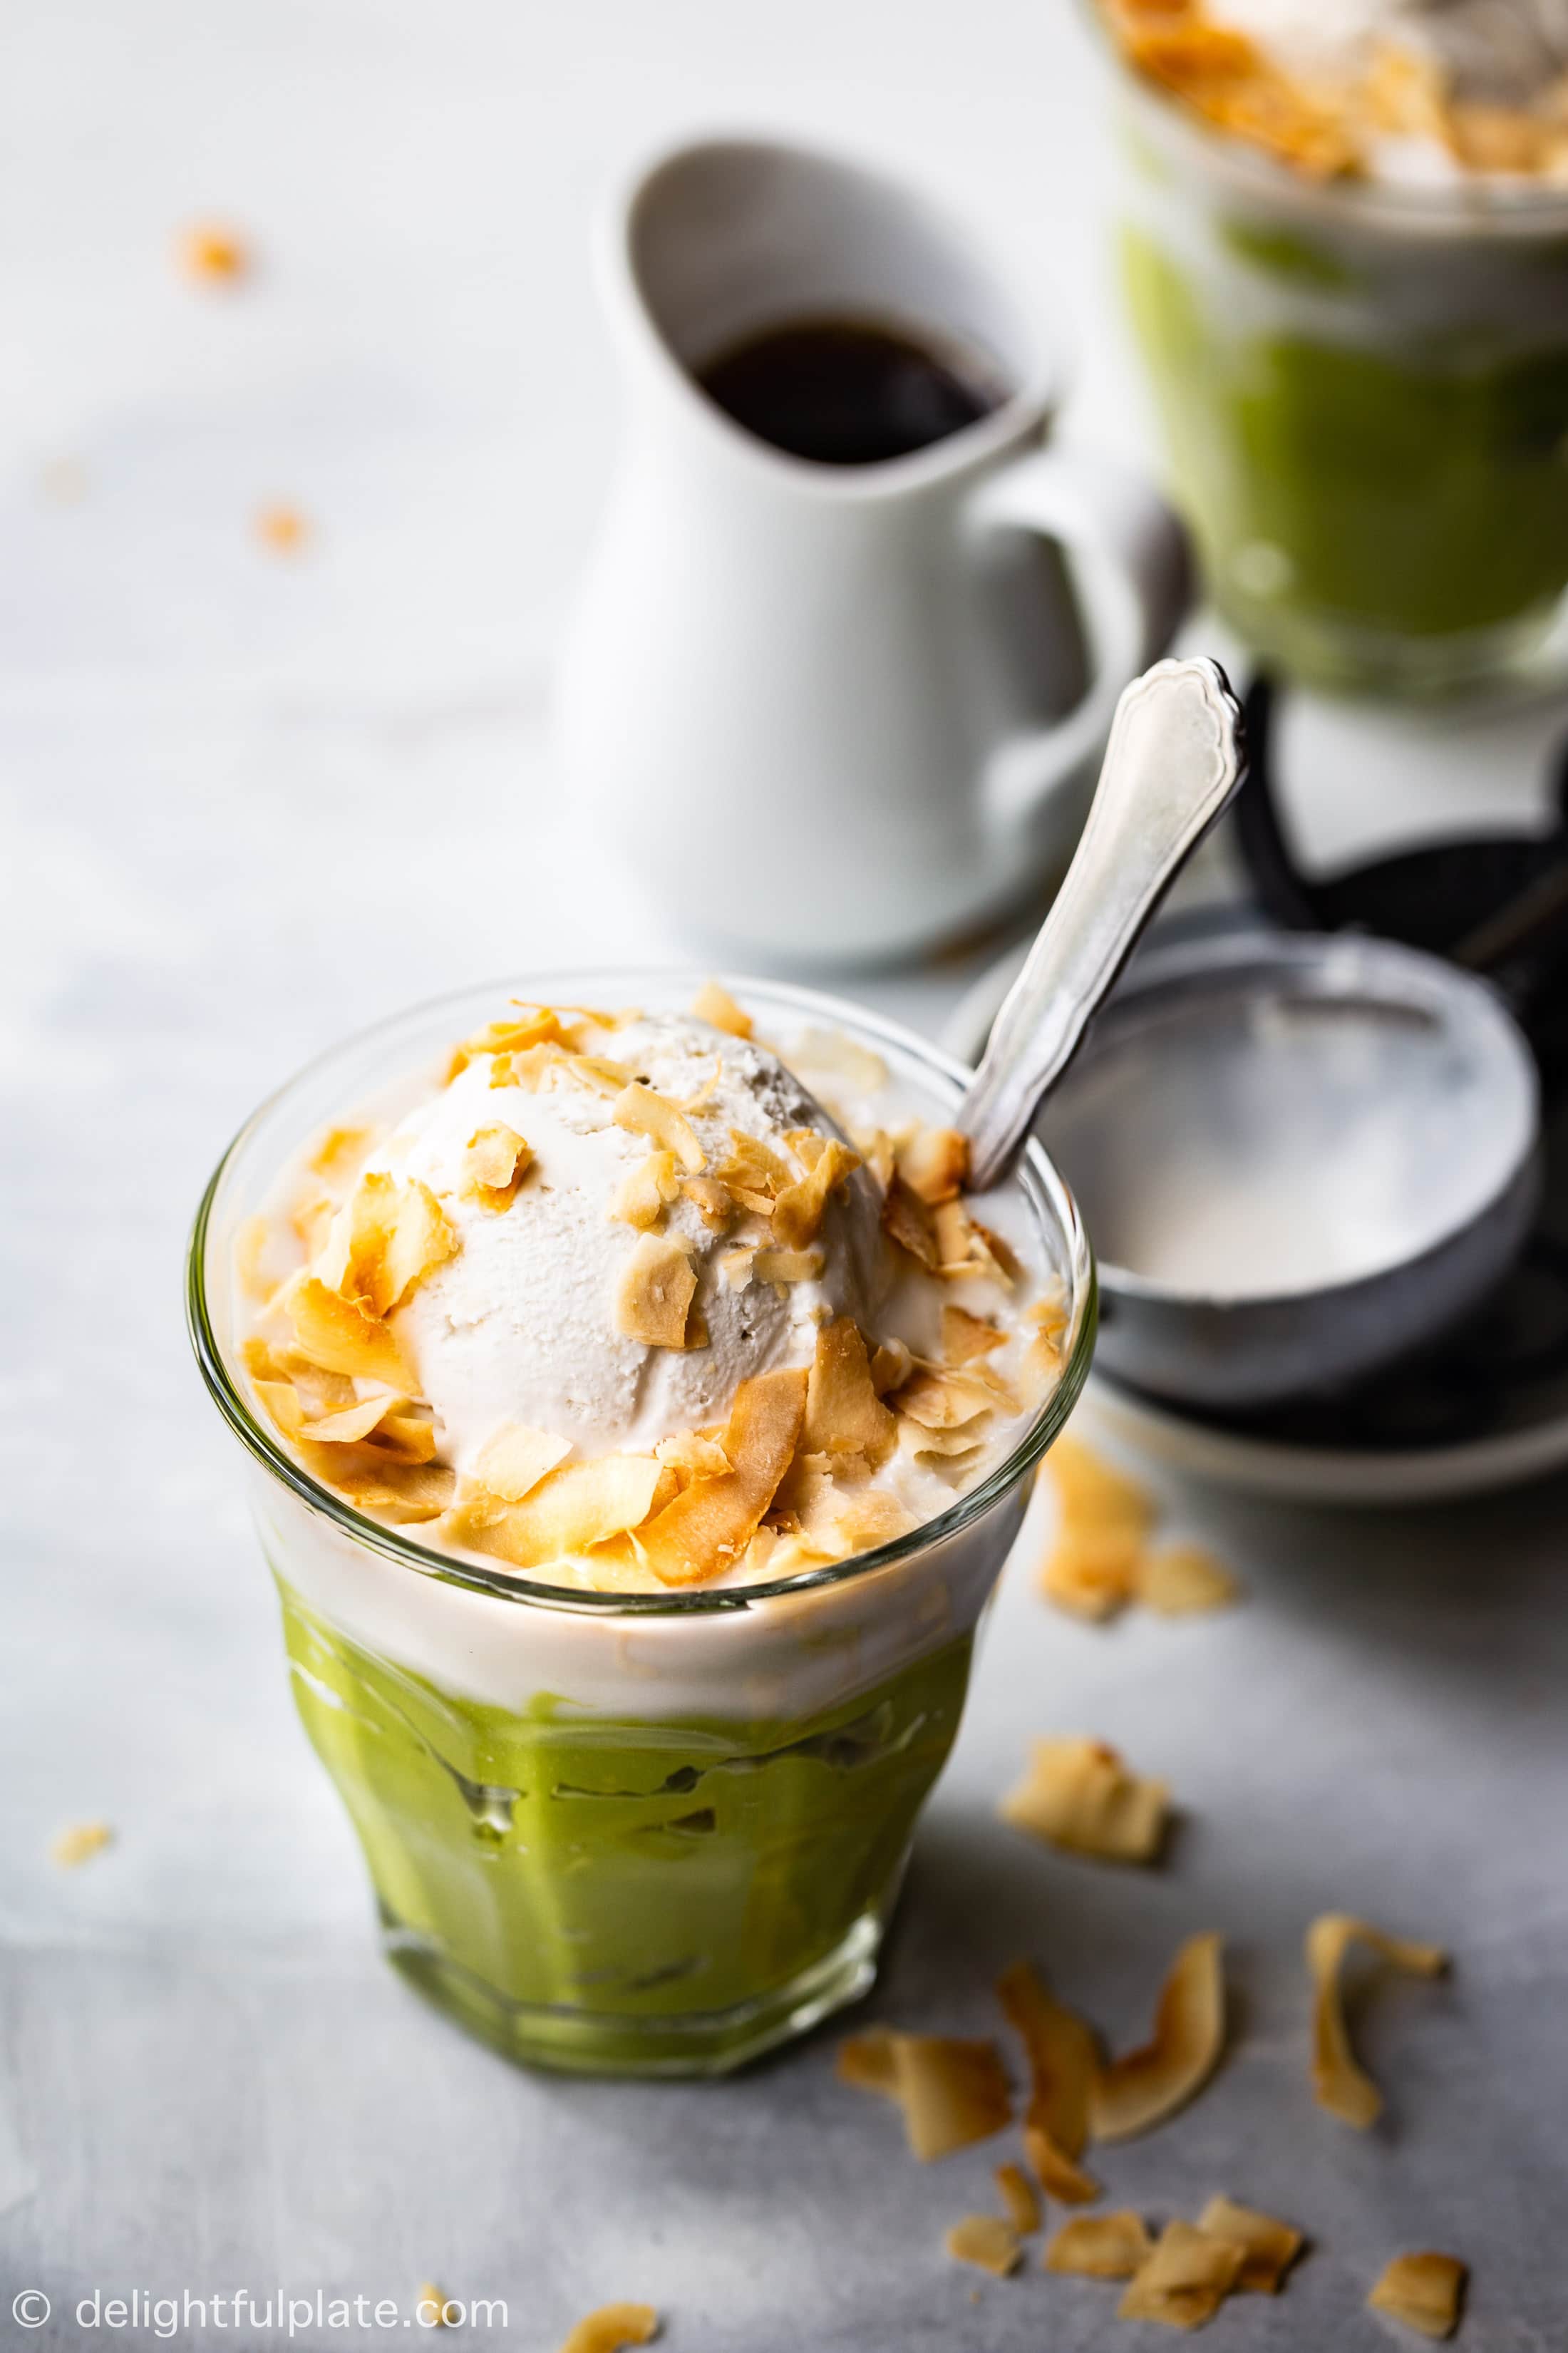 Vietnamese Avocado Mousse Ice Cream (Kem Bo) is a rich and creamy dessert which is super easy and quick to make. It is a popular street food snack in Danang, Vietnam. This dish can be made vegan and dairy-free.